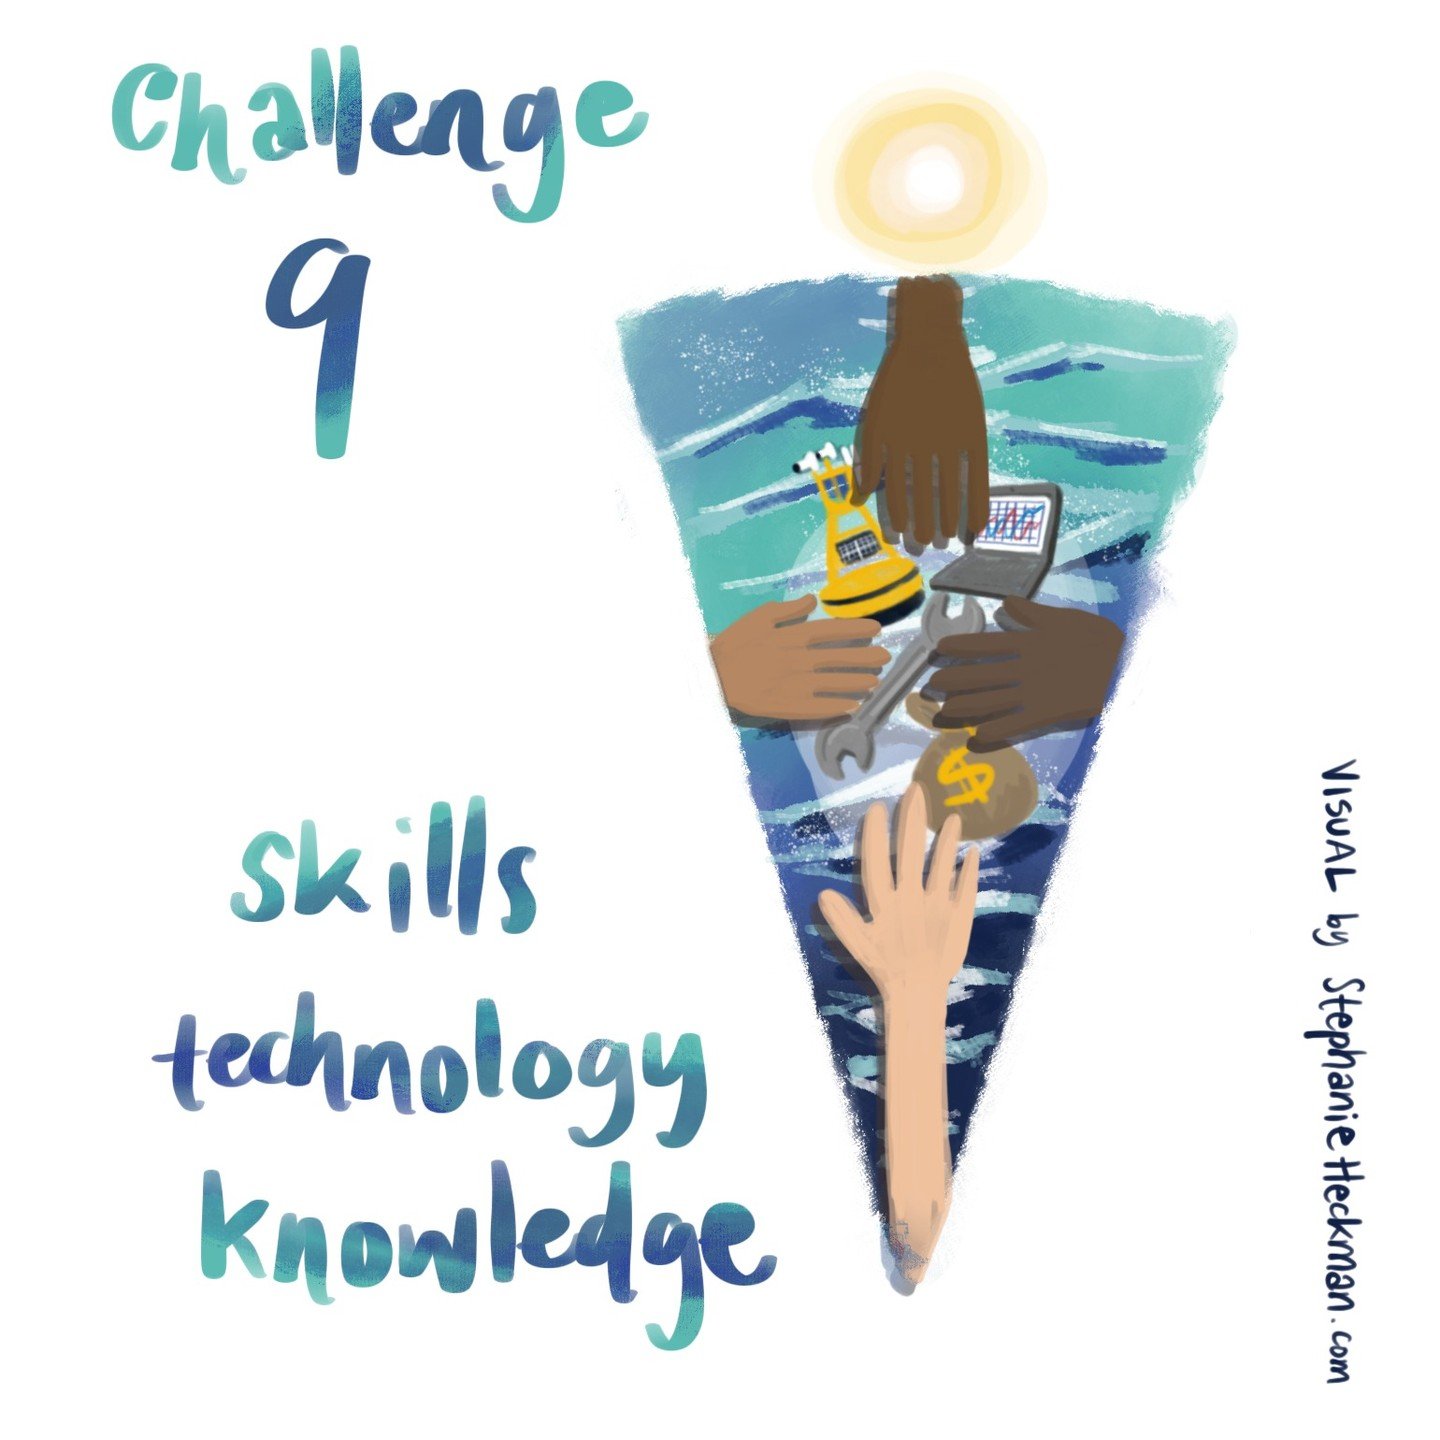 UN Ocean Decade challenge 9: Skills, knowledge, technology for all

We can&rsquo;t possibly do any of this unless with open science, learning from traditional and Indigenous knowledge, and equipping absolutely anybody with ocean information and skill